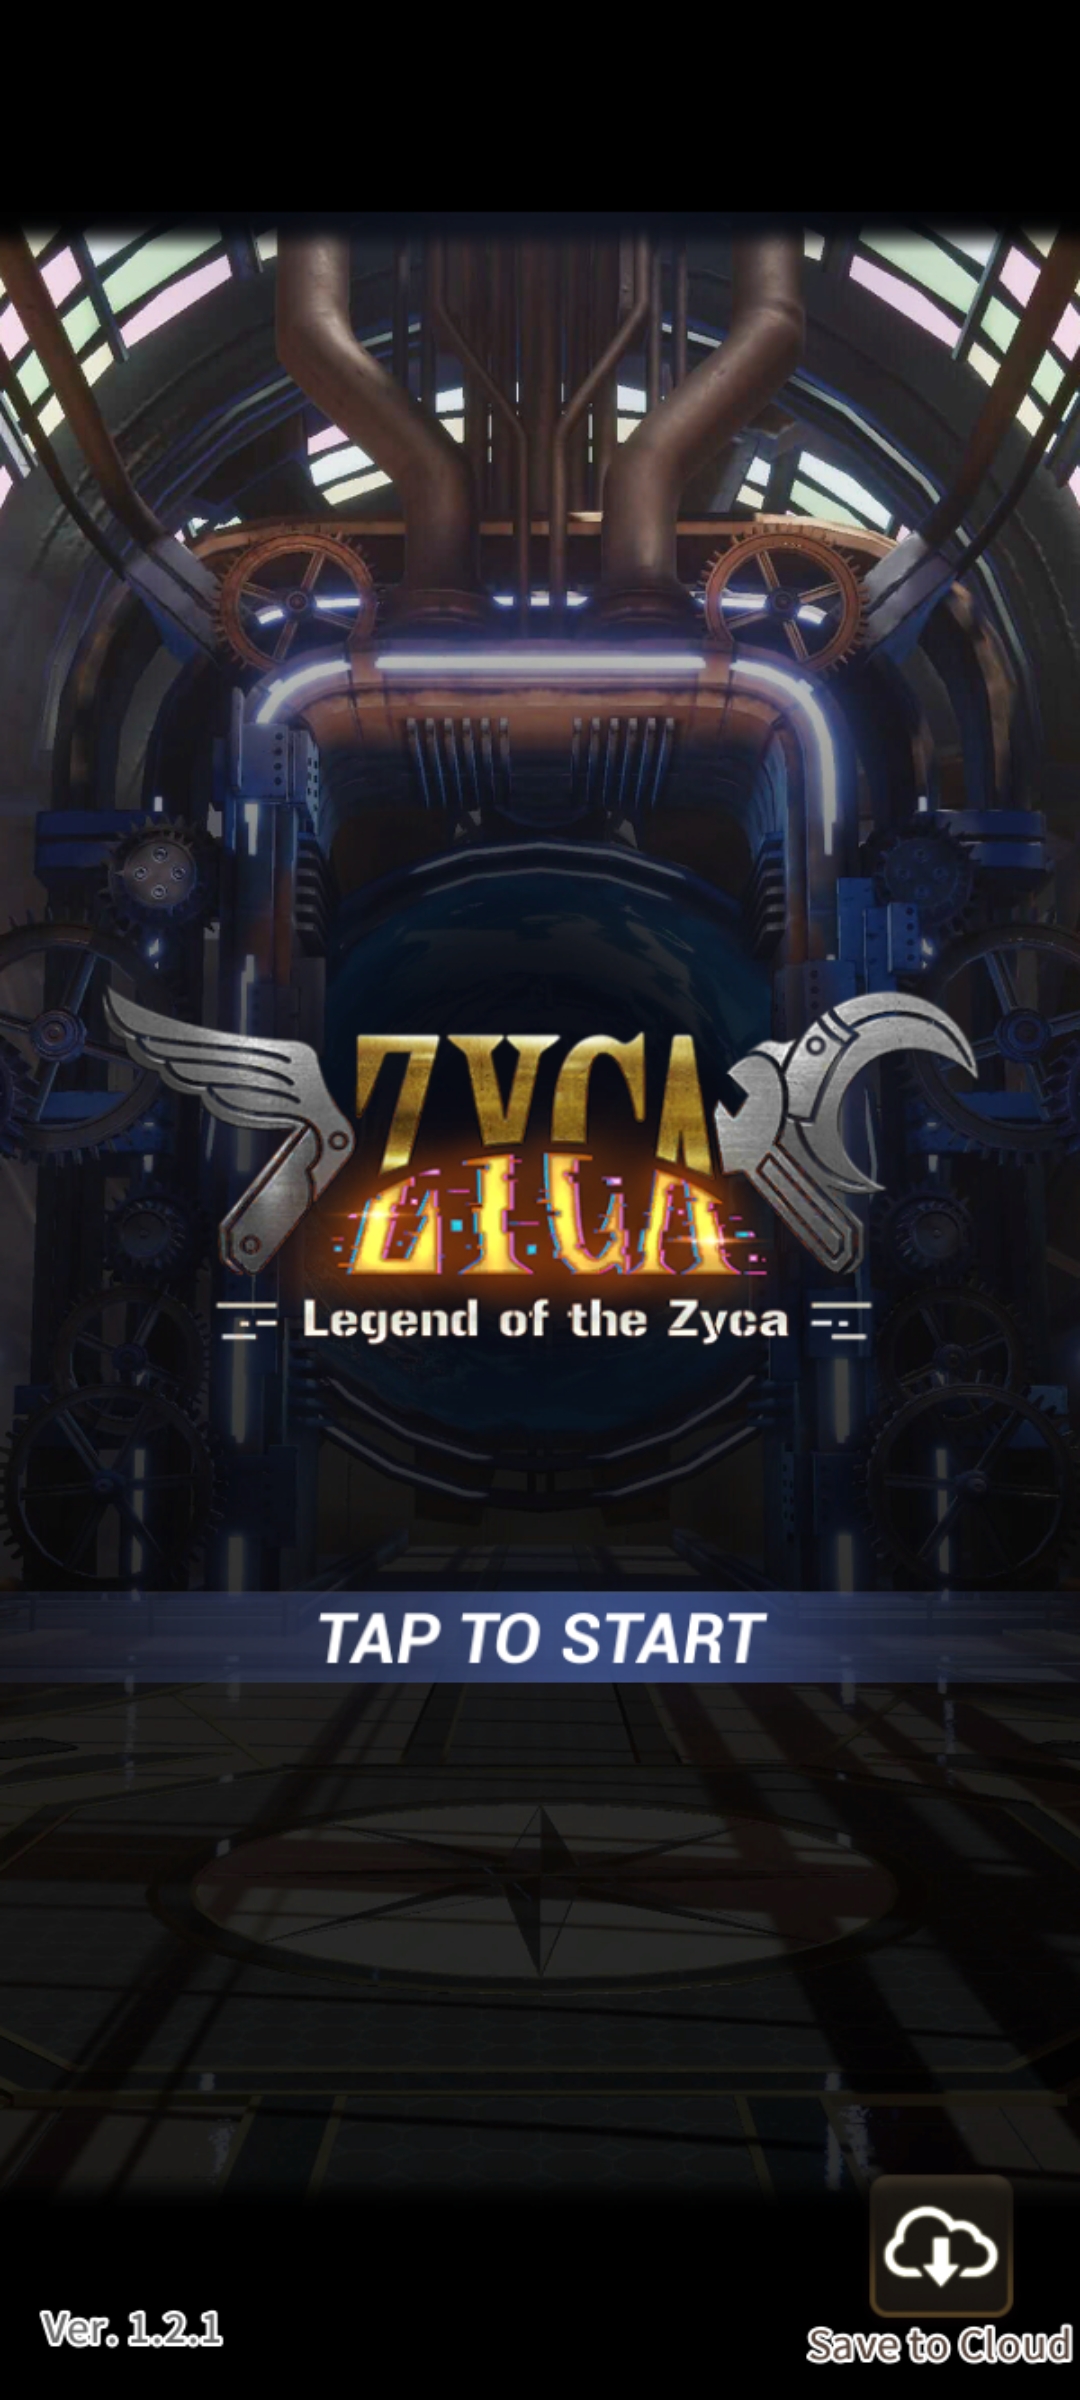 [Game Android] The Legend of ZYCA